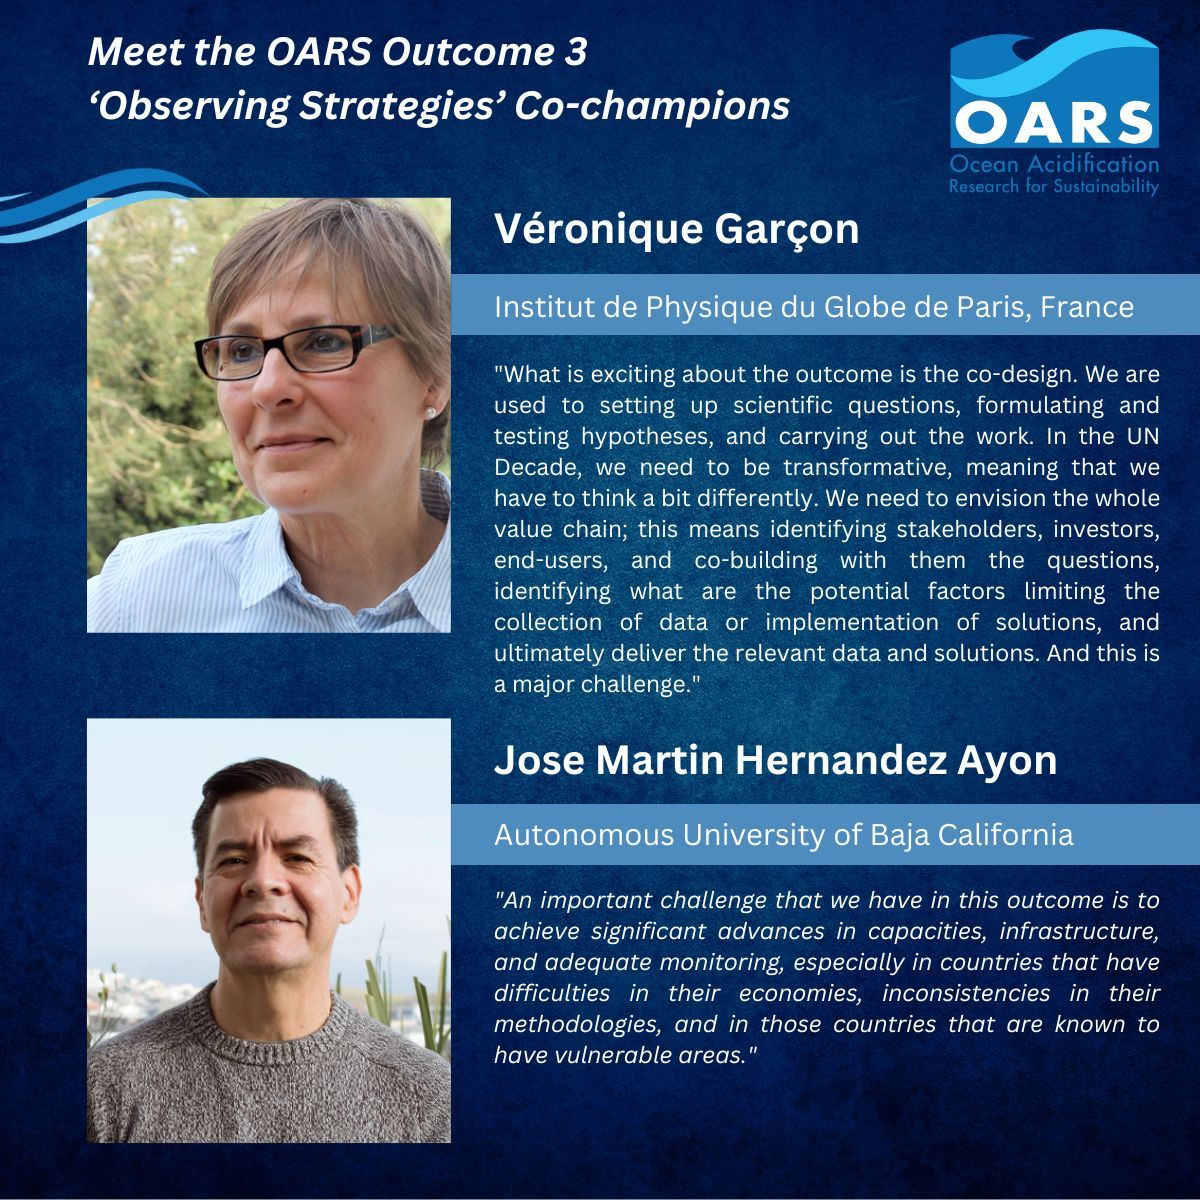 🛰️ Meet our OARS Outcome 3 Dream Team, leading co-designed observation strategies with data producers and end-users. Join Véronique Garçon and Jose Martin Hernandez Ayon's interdisciplinary  group. Contribute to ocean acidification solutions. Learn more: buff.ly/3WxJmM0